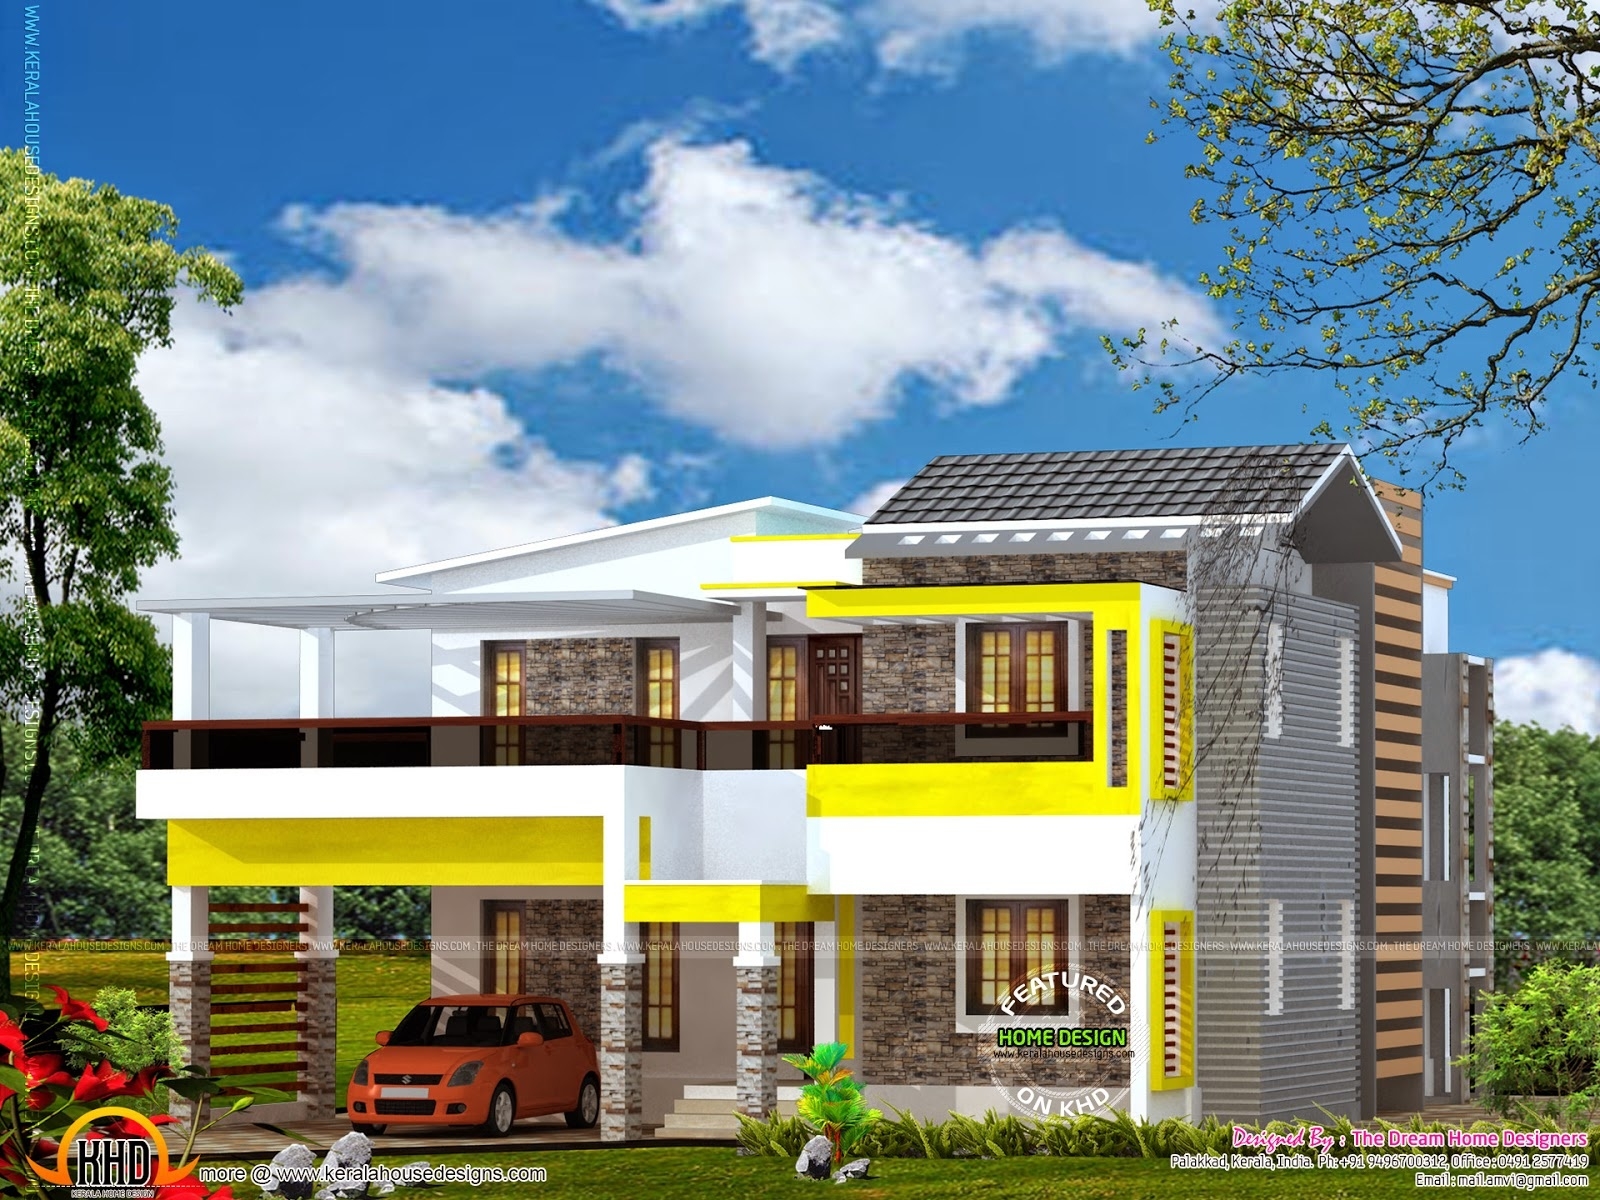 Cool house plan with elevation kerala home design and floor plans with regard to good ground floor plan and elevation